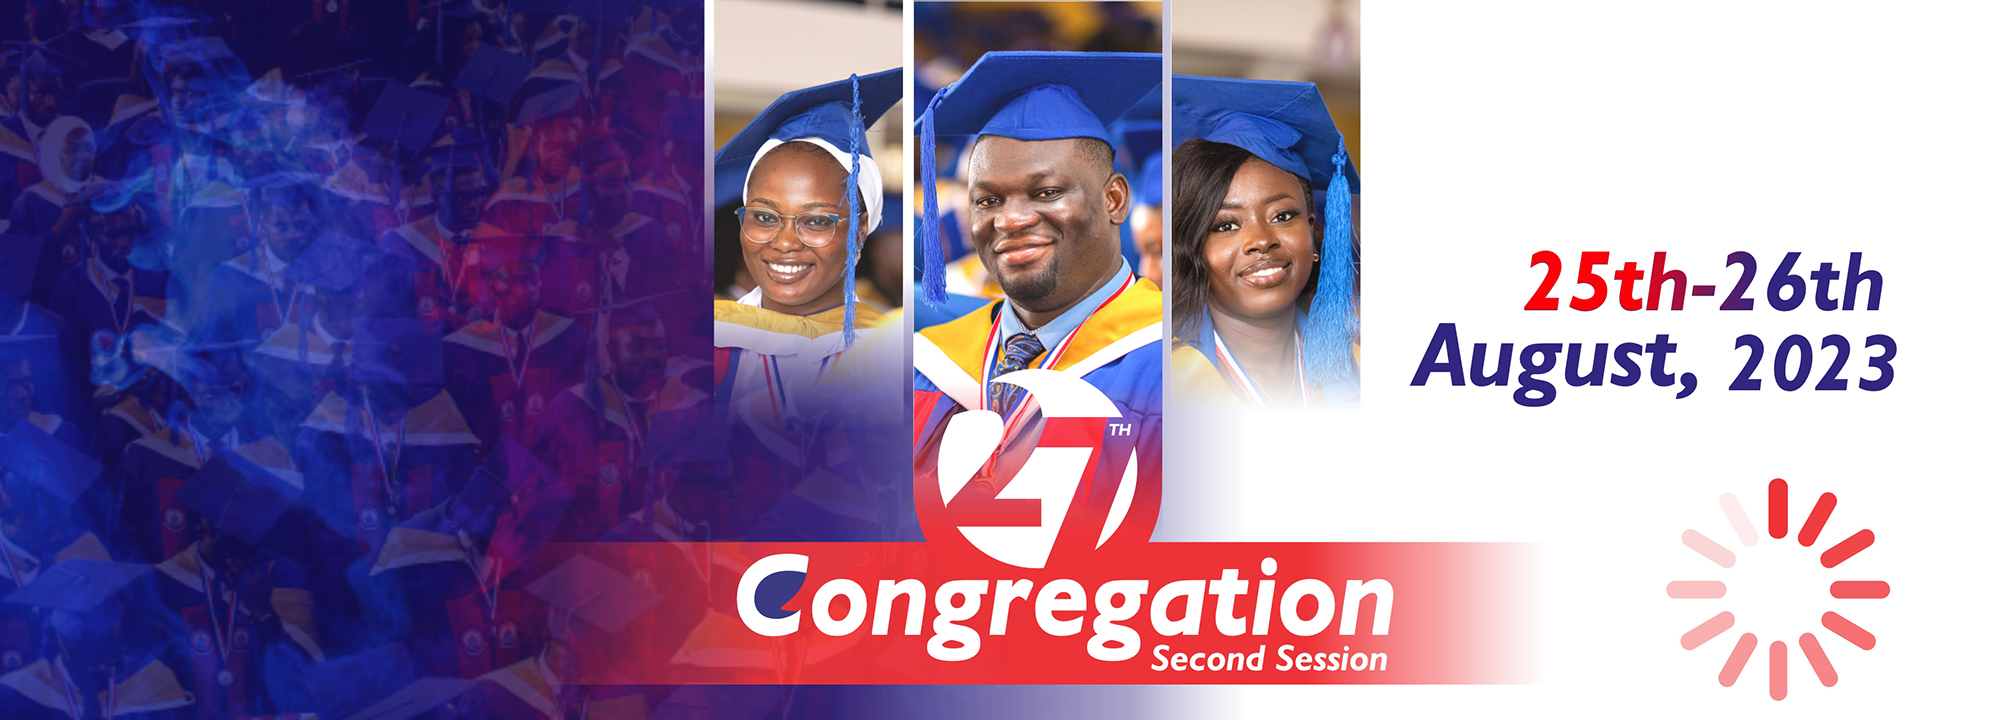 UEW 27th Congregation | Second Session